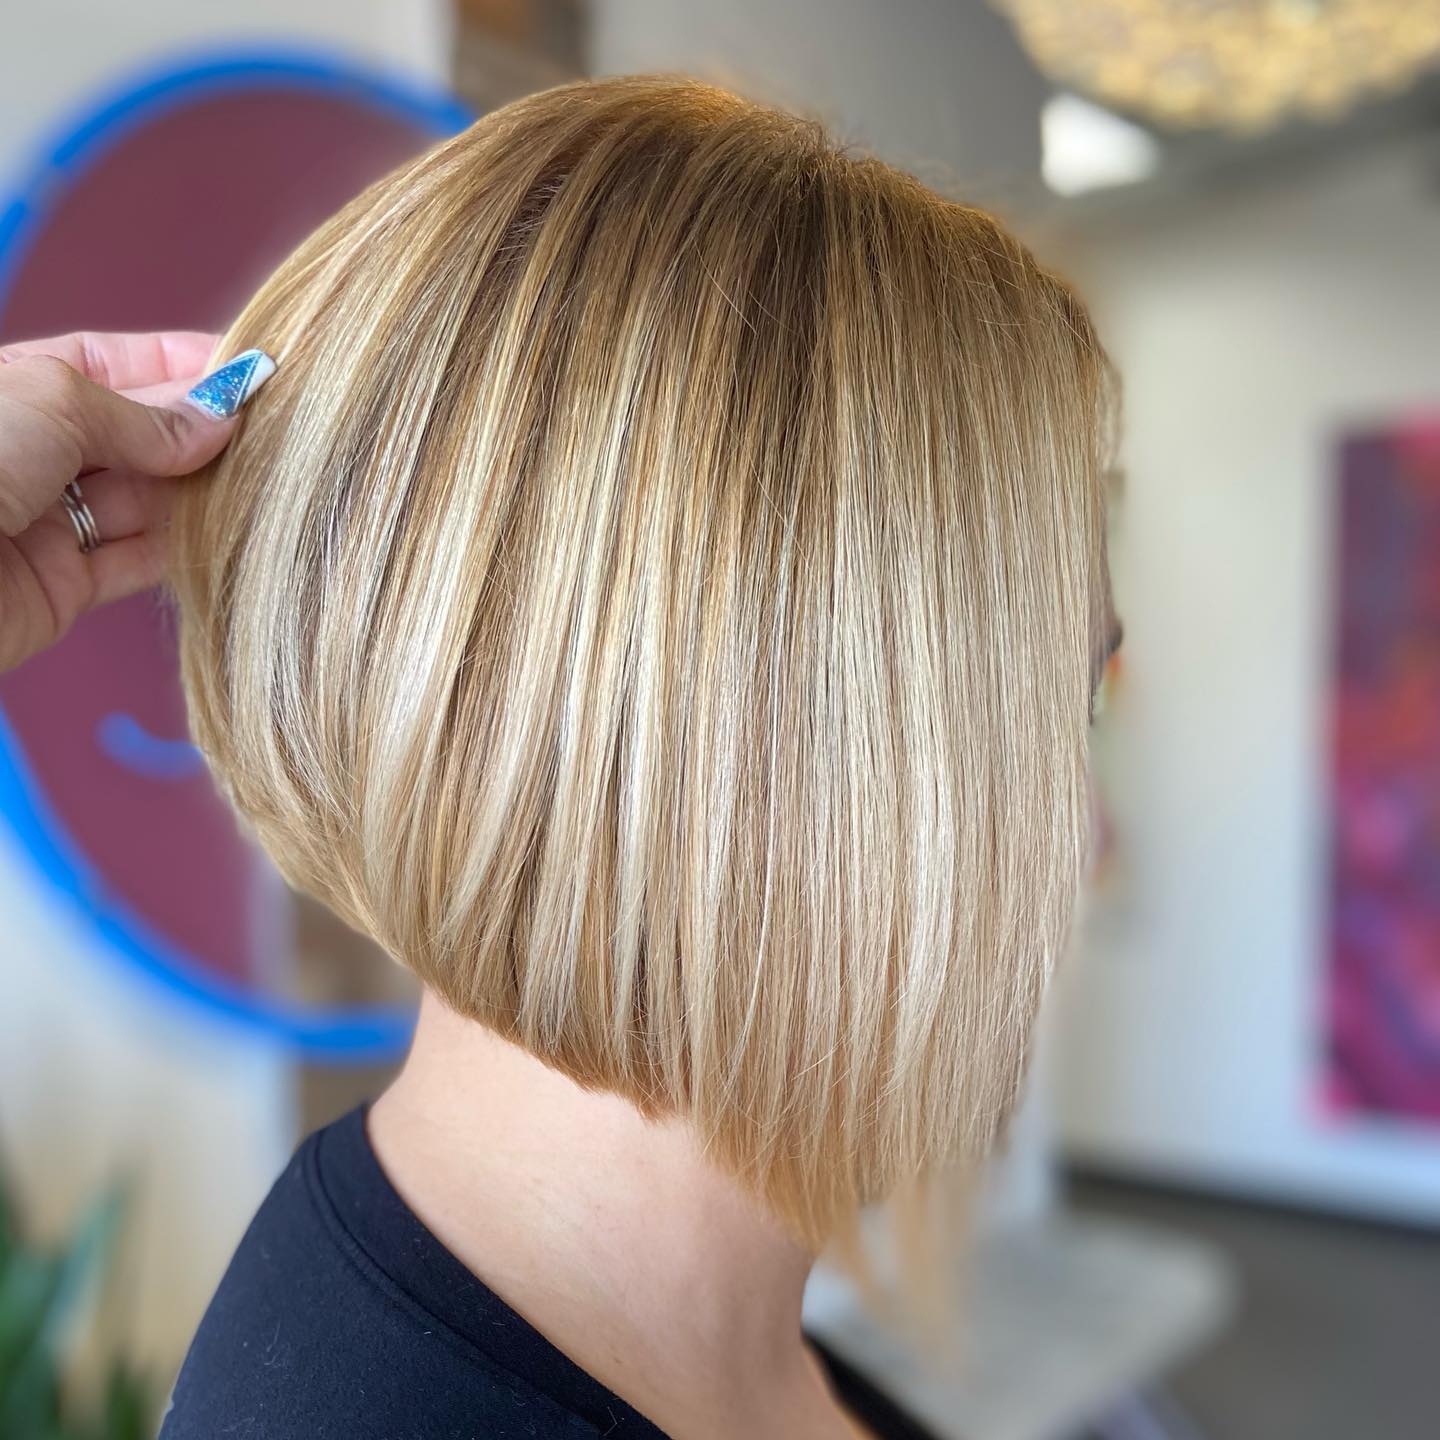 Stacked Bob 104 Long stacked bob | Medium length stacked bob | Pictures of stacked bob haircuts front and back Stacked Bob Hairstyles for Women